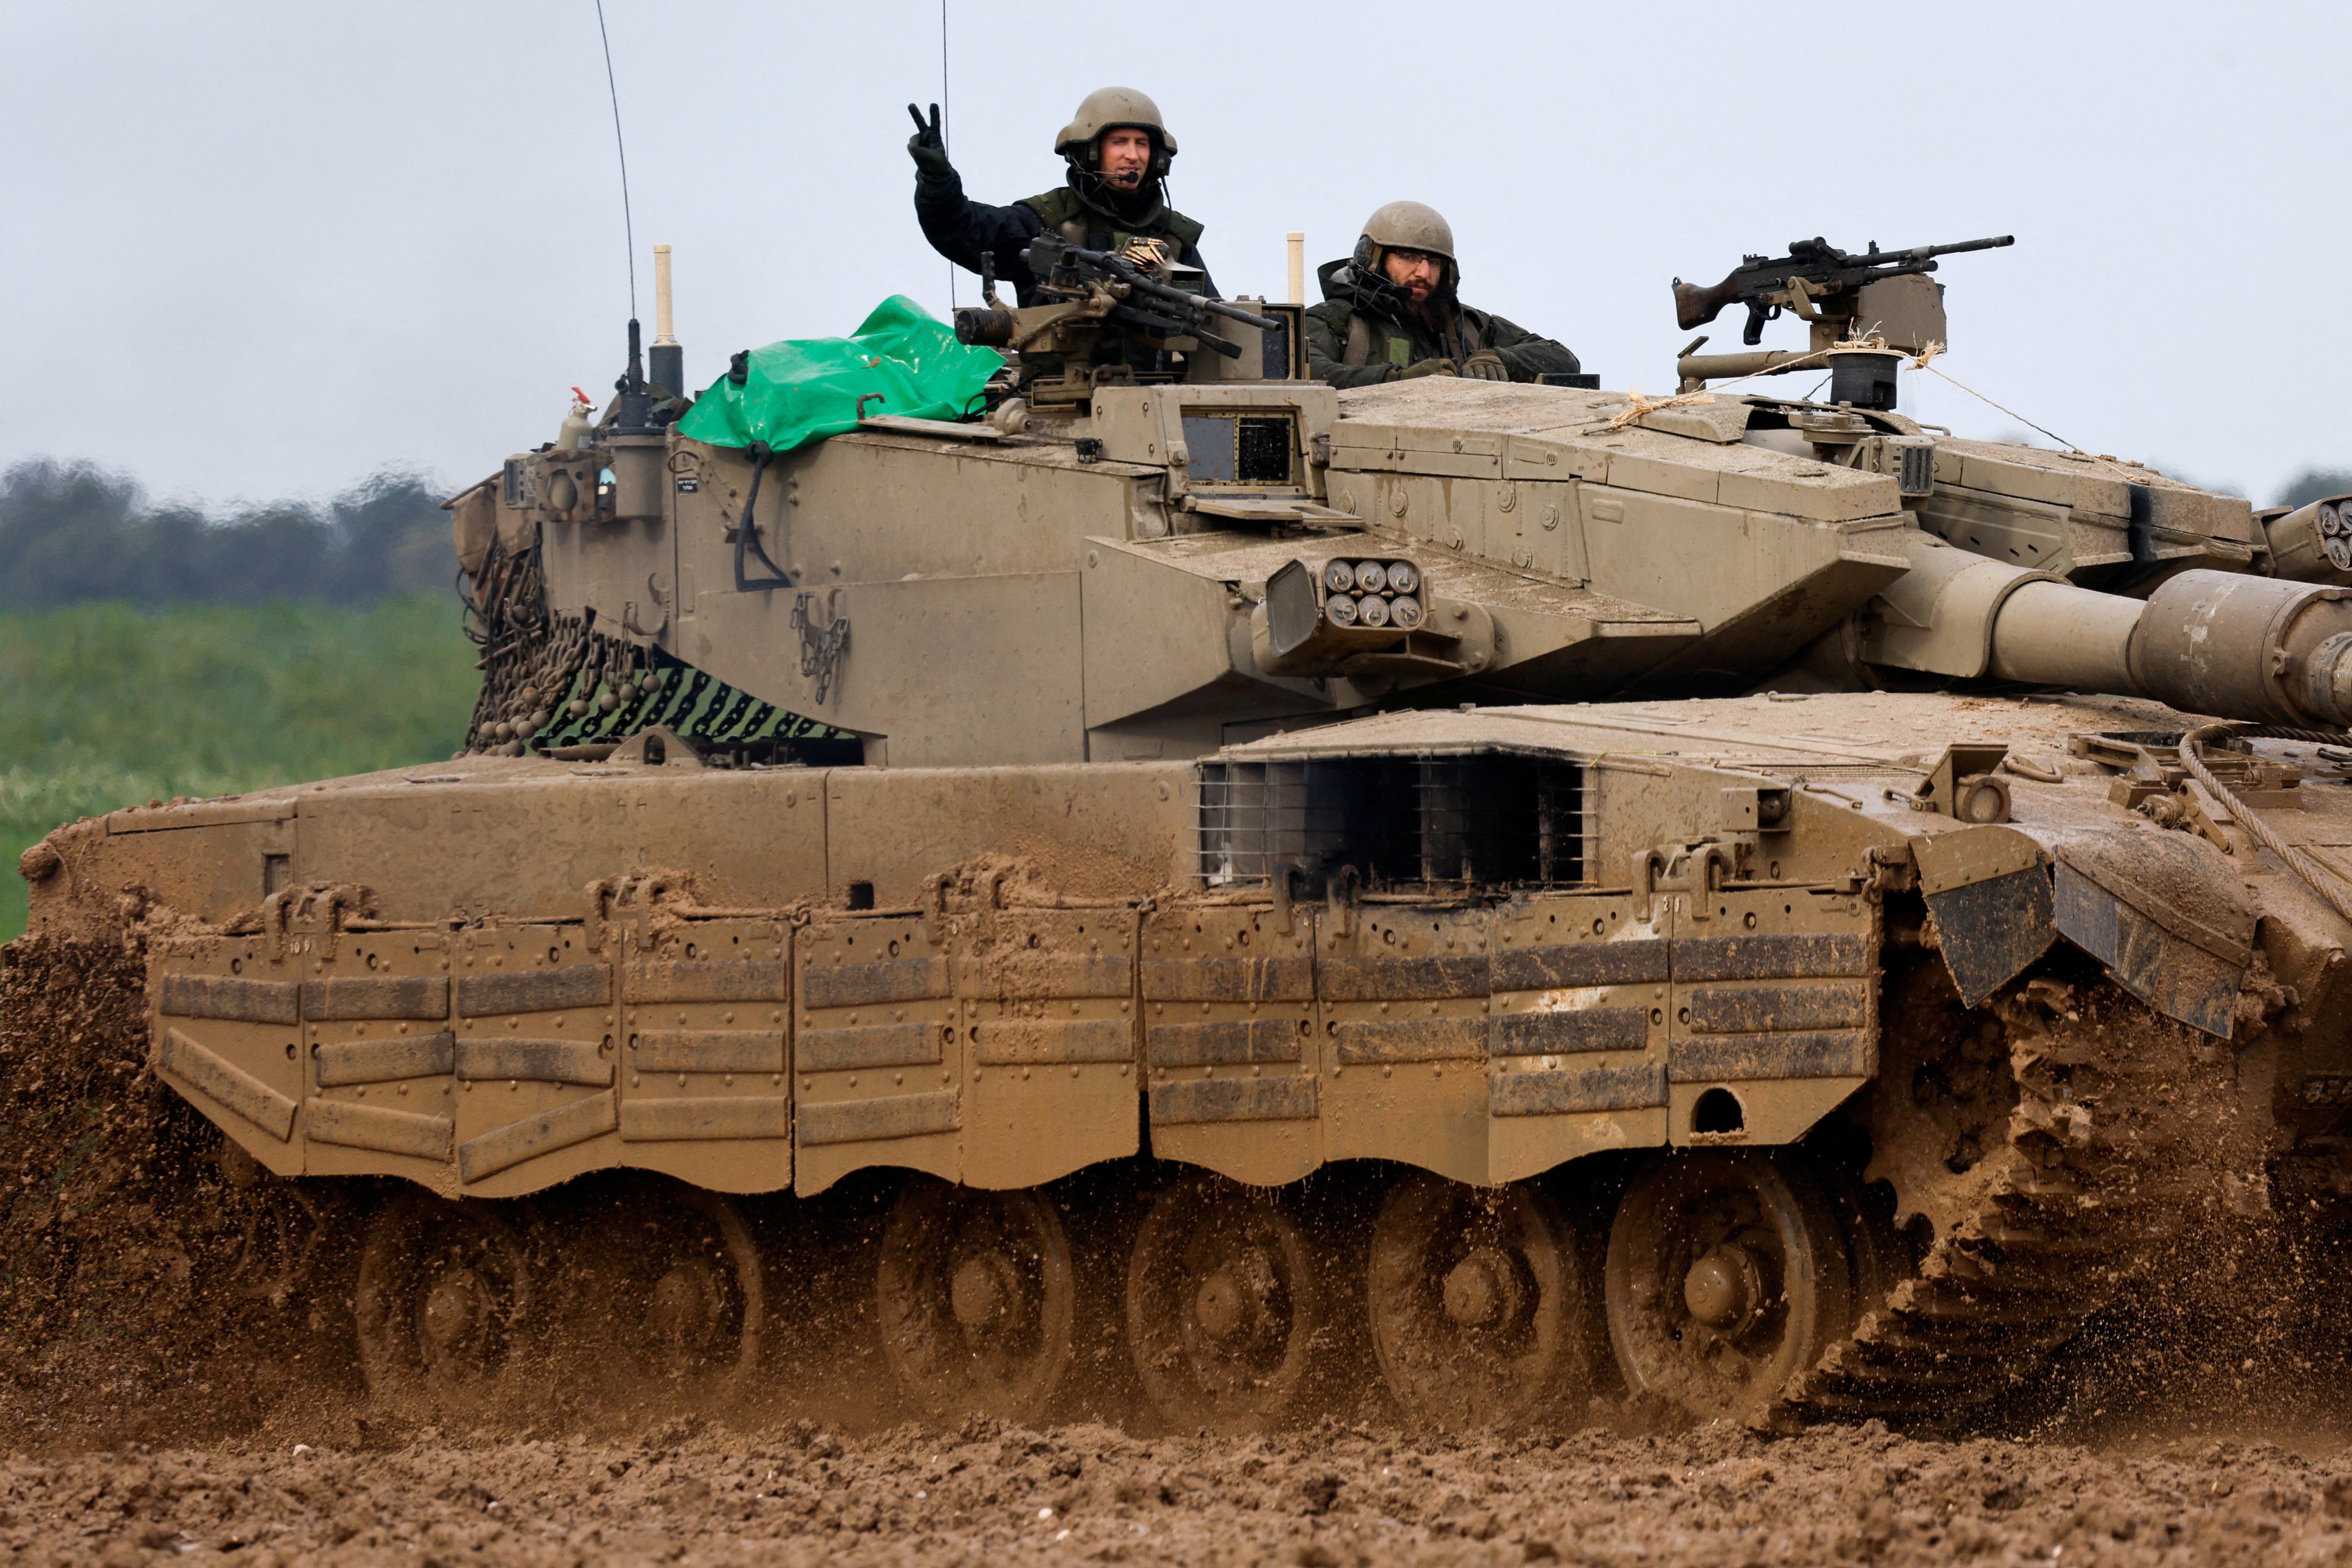 An Israeli soldier gestures to the camera as he rides in a tank near the Israel-Gaza border on Saturday. Photo: Reuters